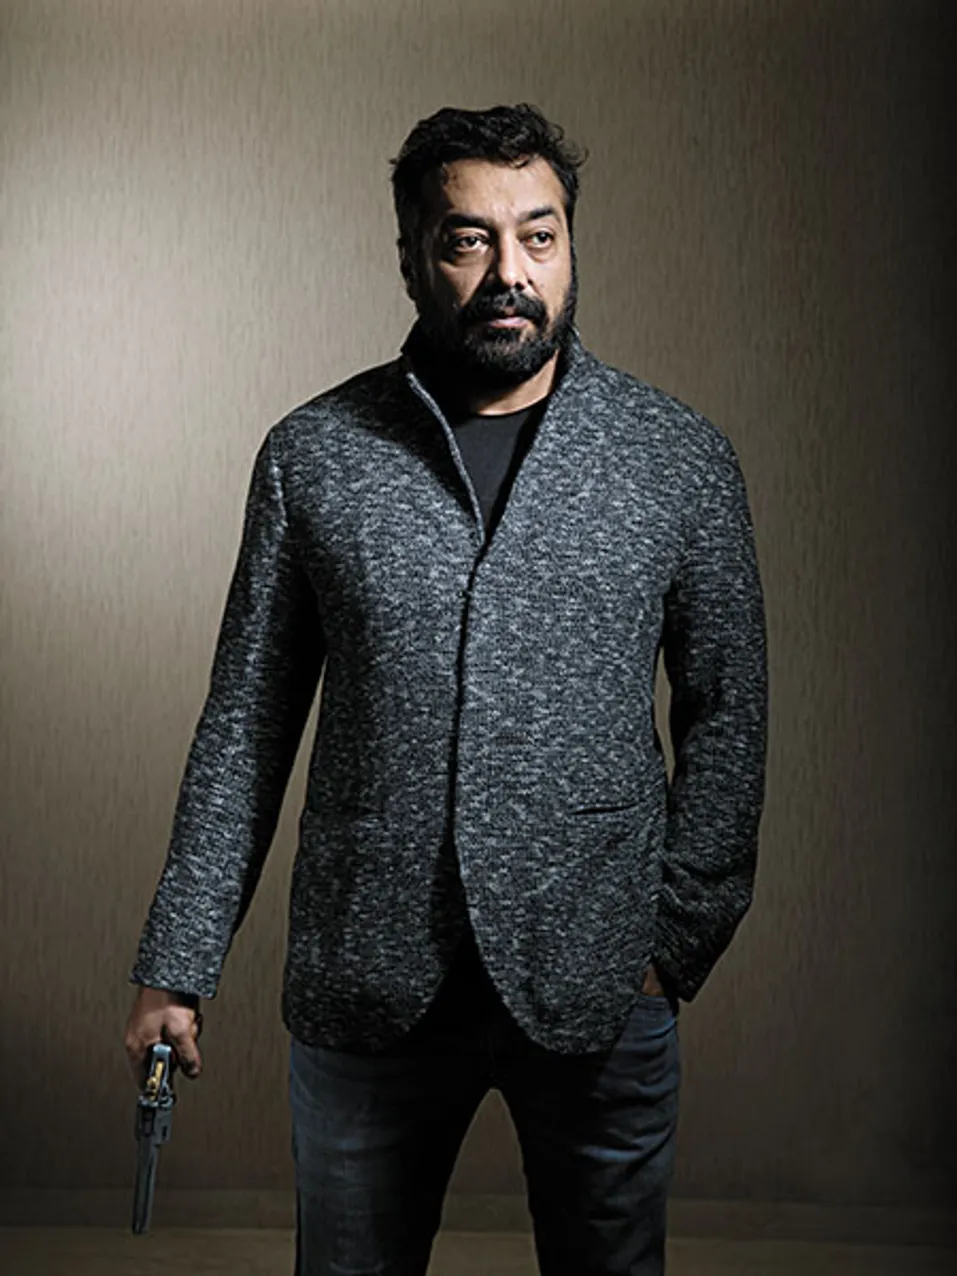 No-holds-barred Anurag Kashyap: AK47, Reloaded - Forbes India